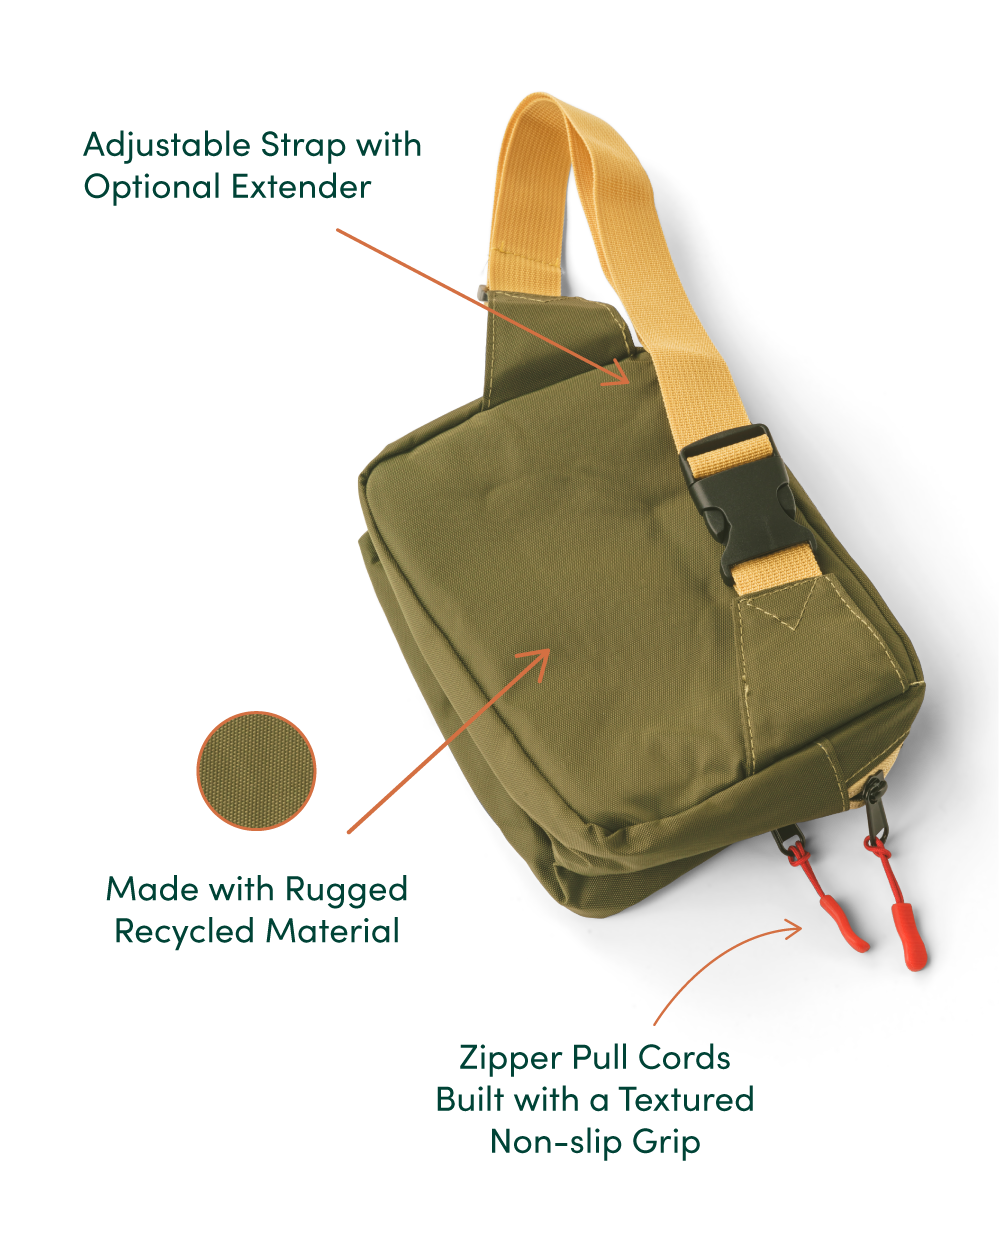 Adjustable Strap with Optional Extender. Made with Rugged Recycled Material. Zipper Pull Cords Built with a Textured Non-slip Grip.